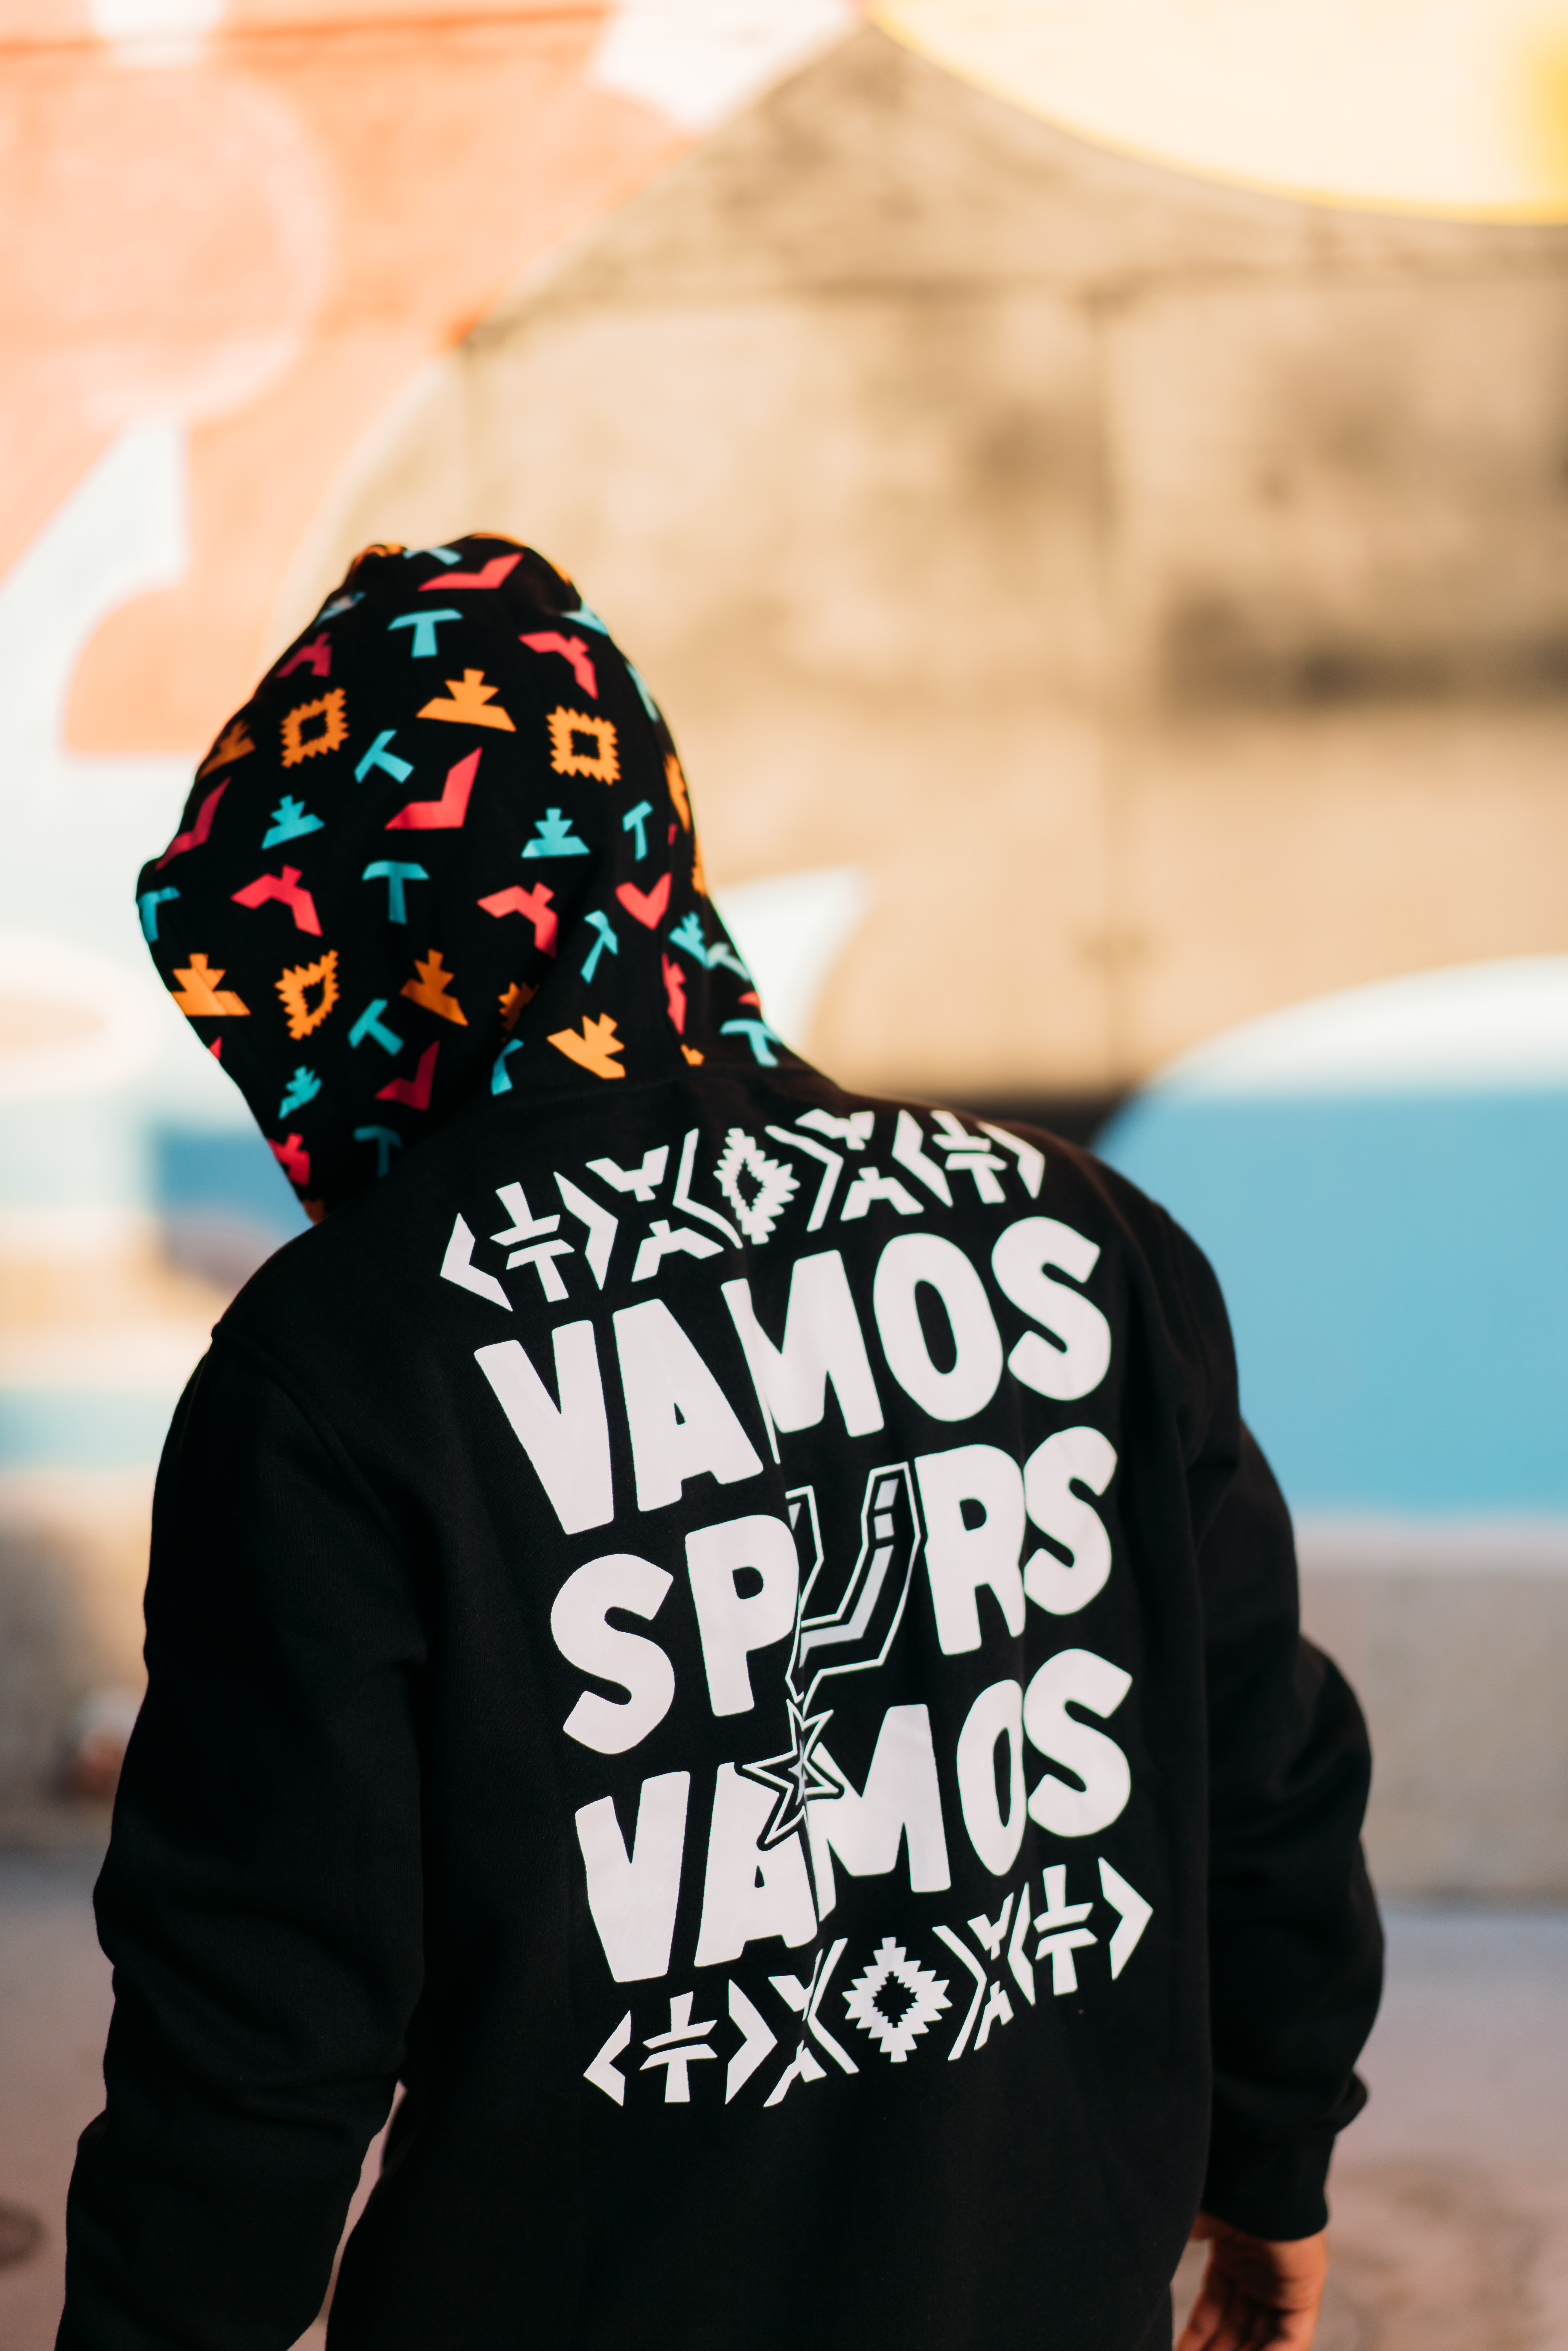 San Antonio Spurs announce La Cultura clothing line inspired by